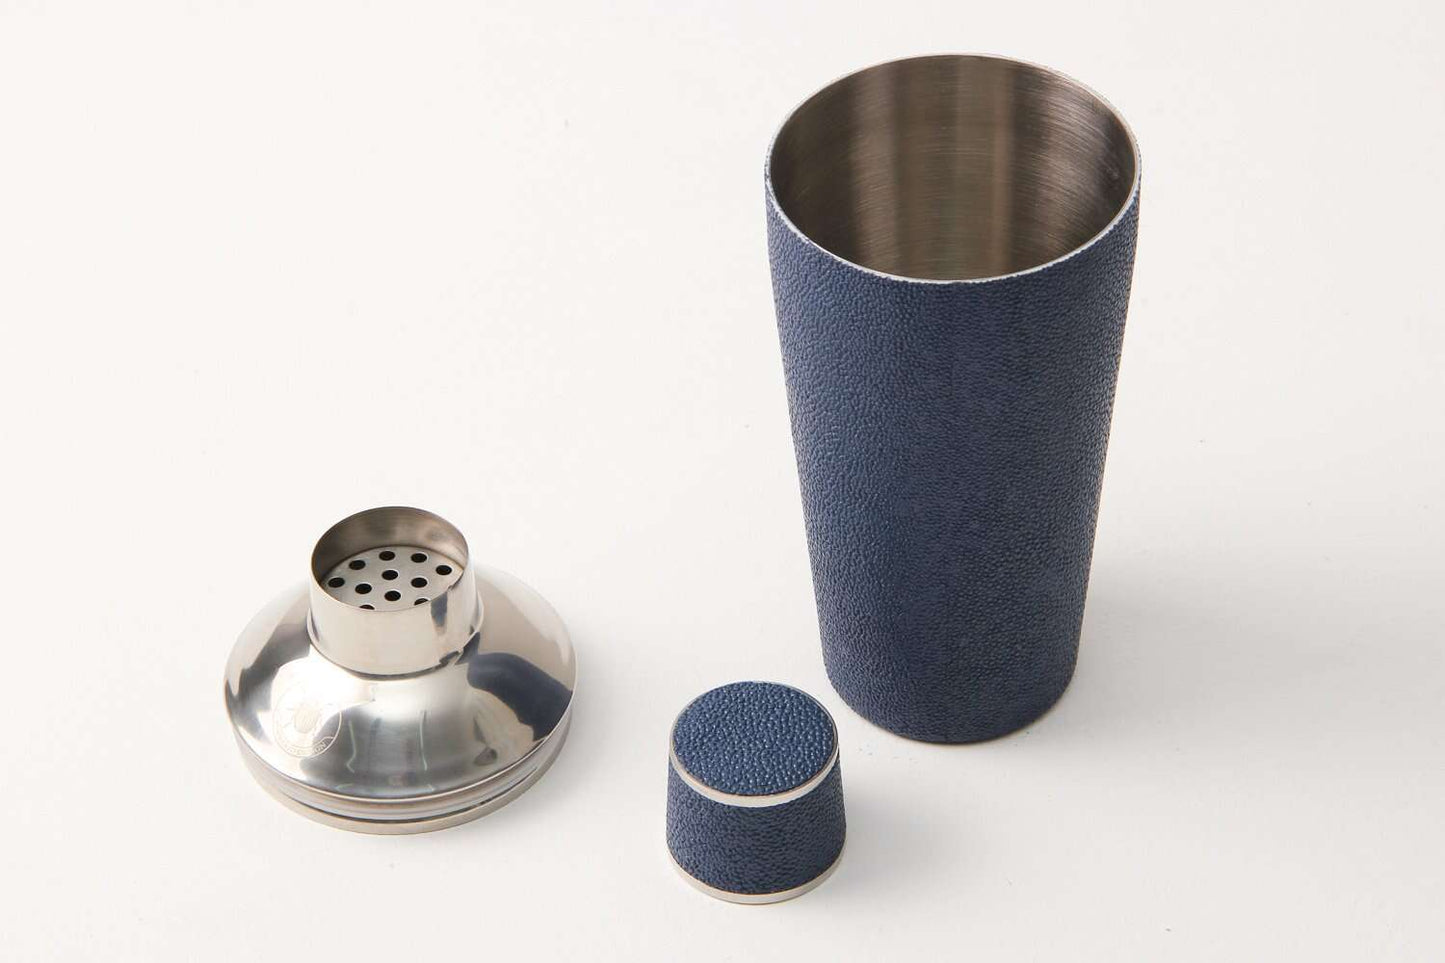 Cocktail Shaker in Nile Blue Shagreen